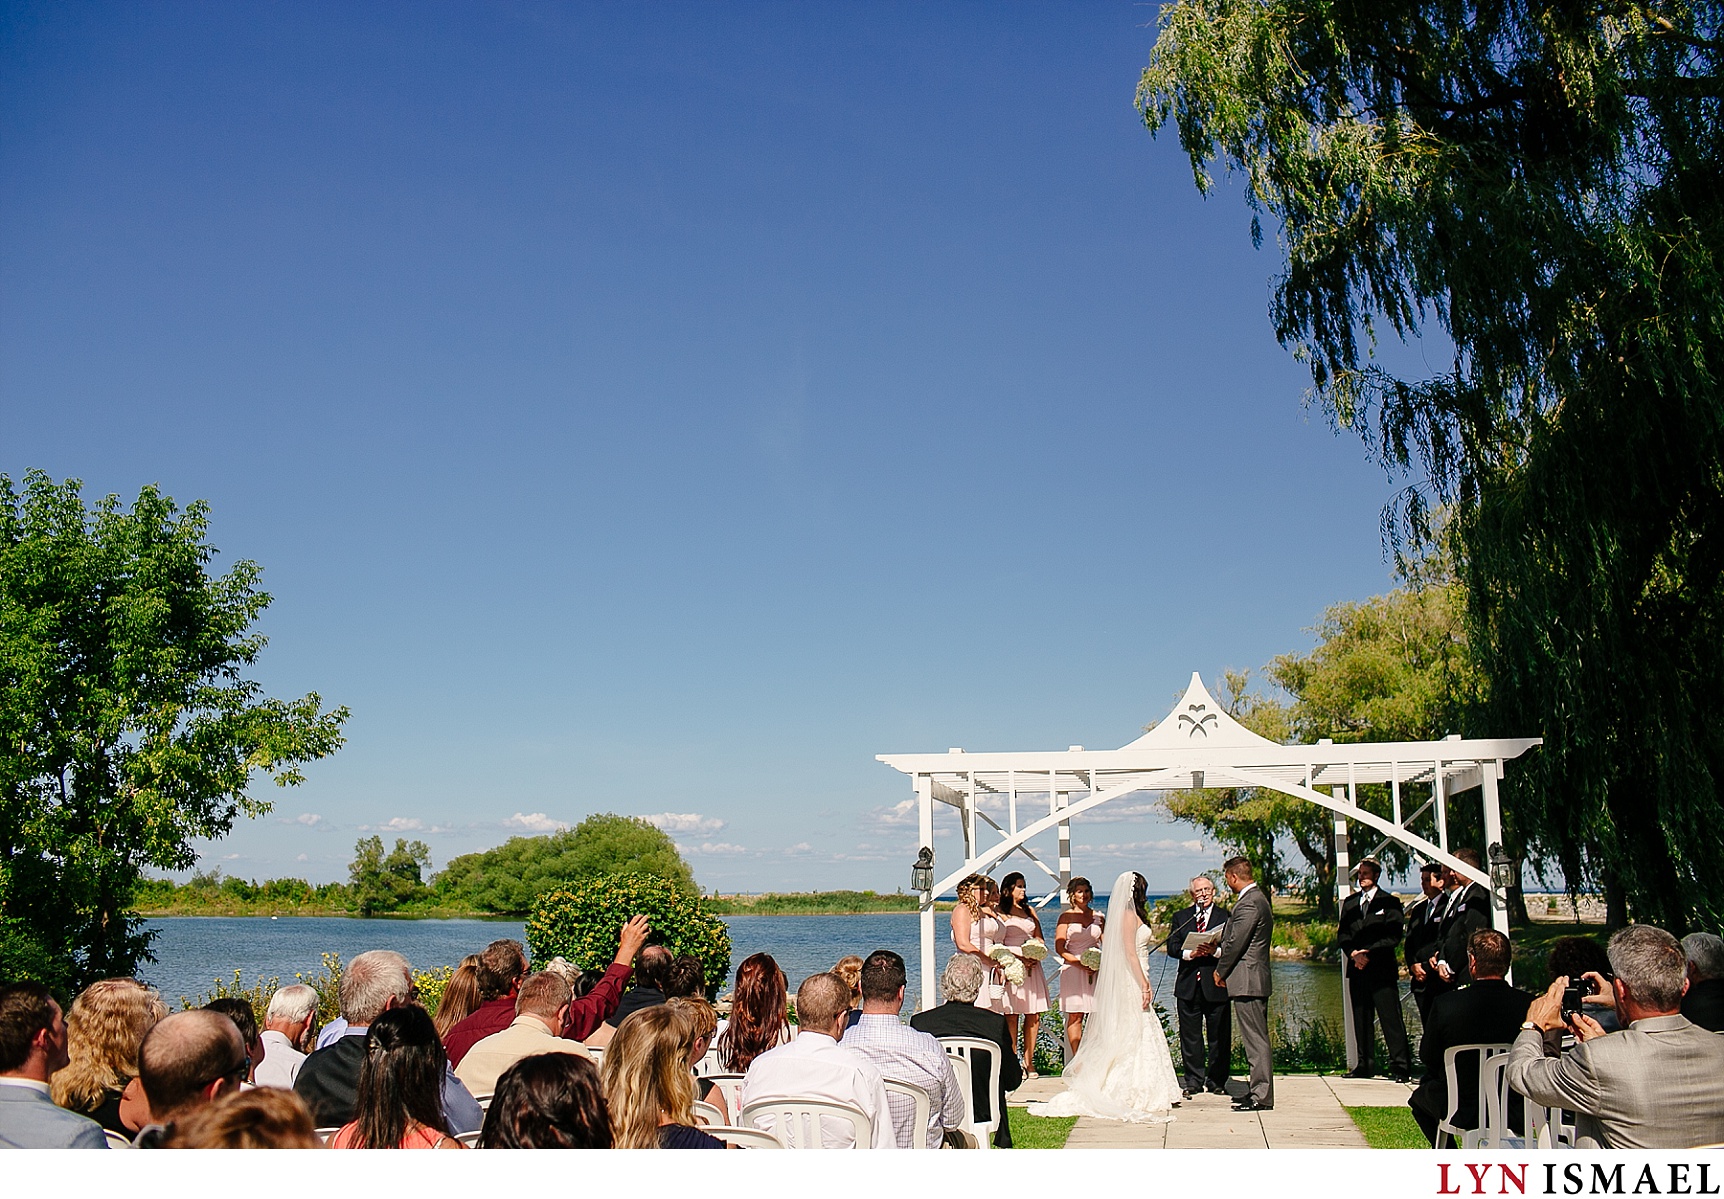 The bride and groom get married at the ceremony venue of Cranberry Resort  in Collingwood.